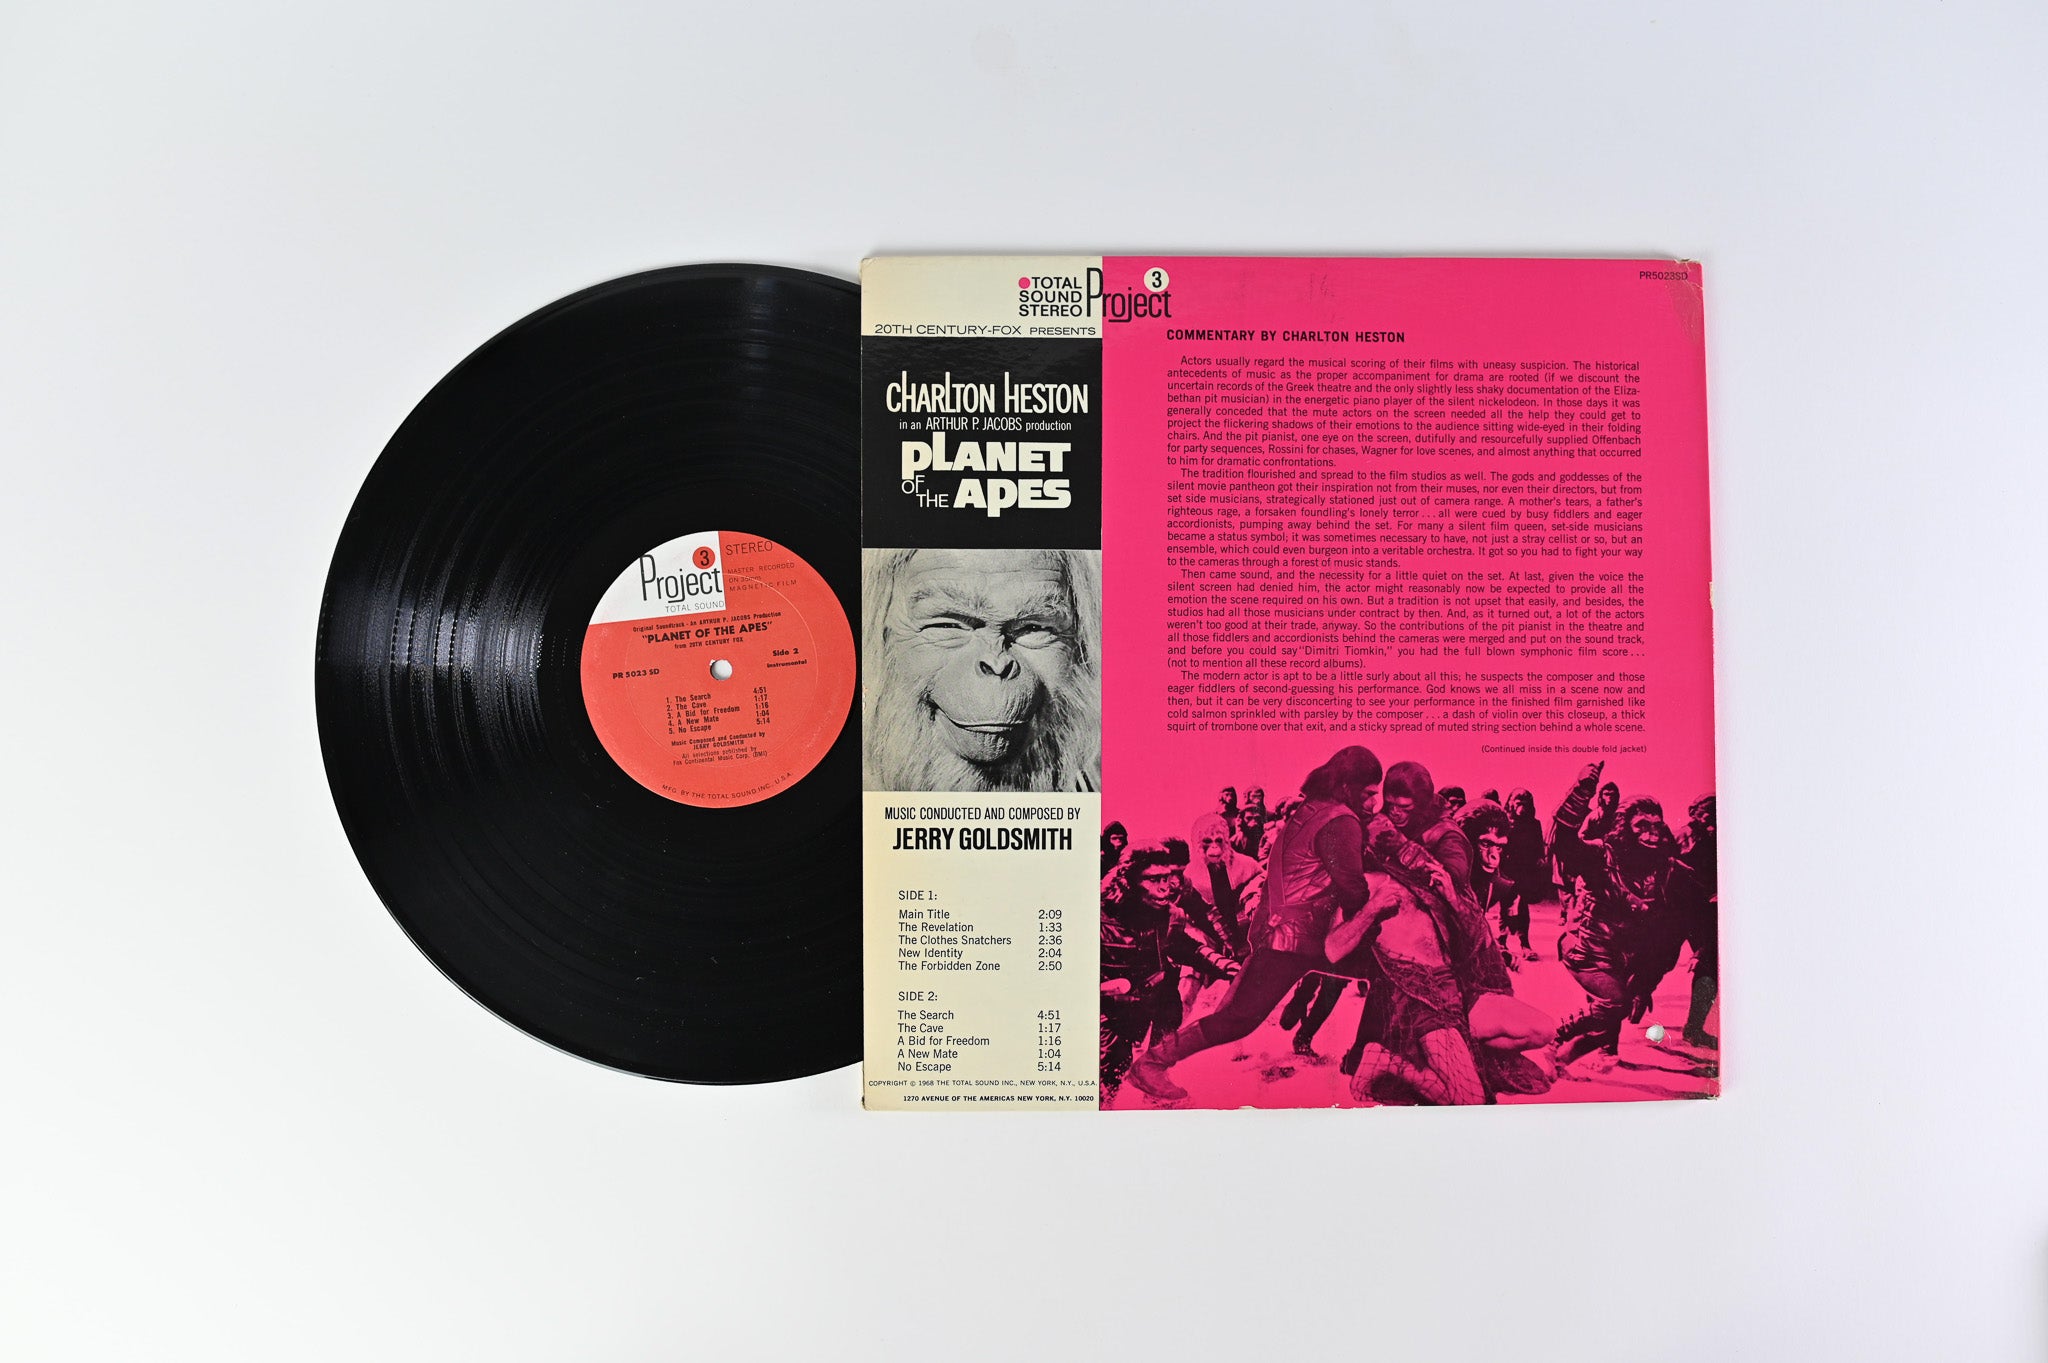 Jerry Goldsmith - Planet Of The Apes (Original Motion Picture Soundtrack) on Project 3 Total Sound